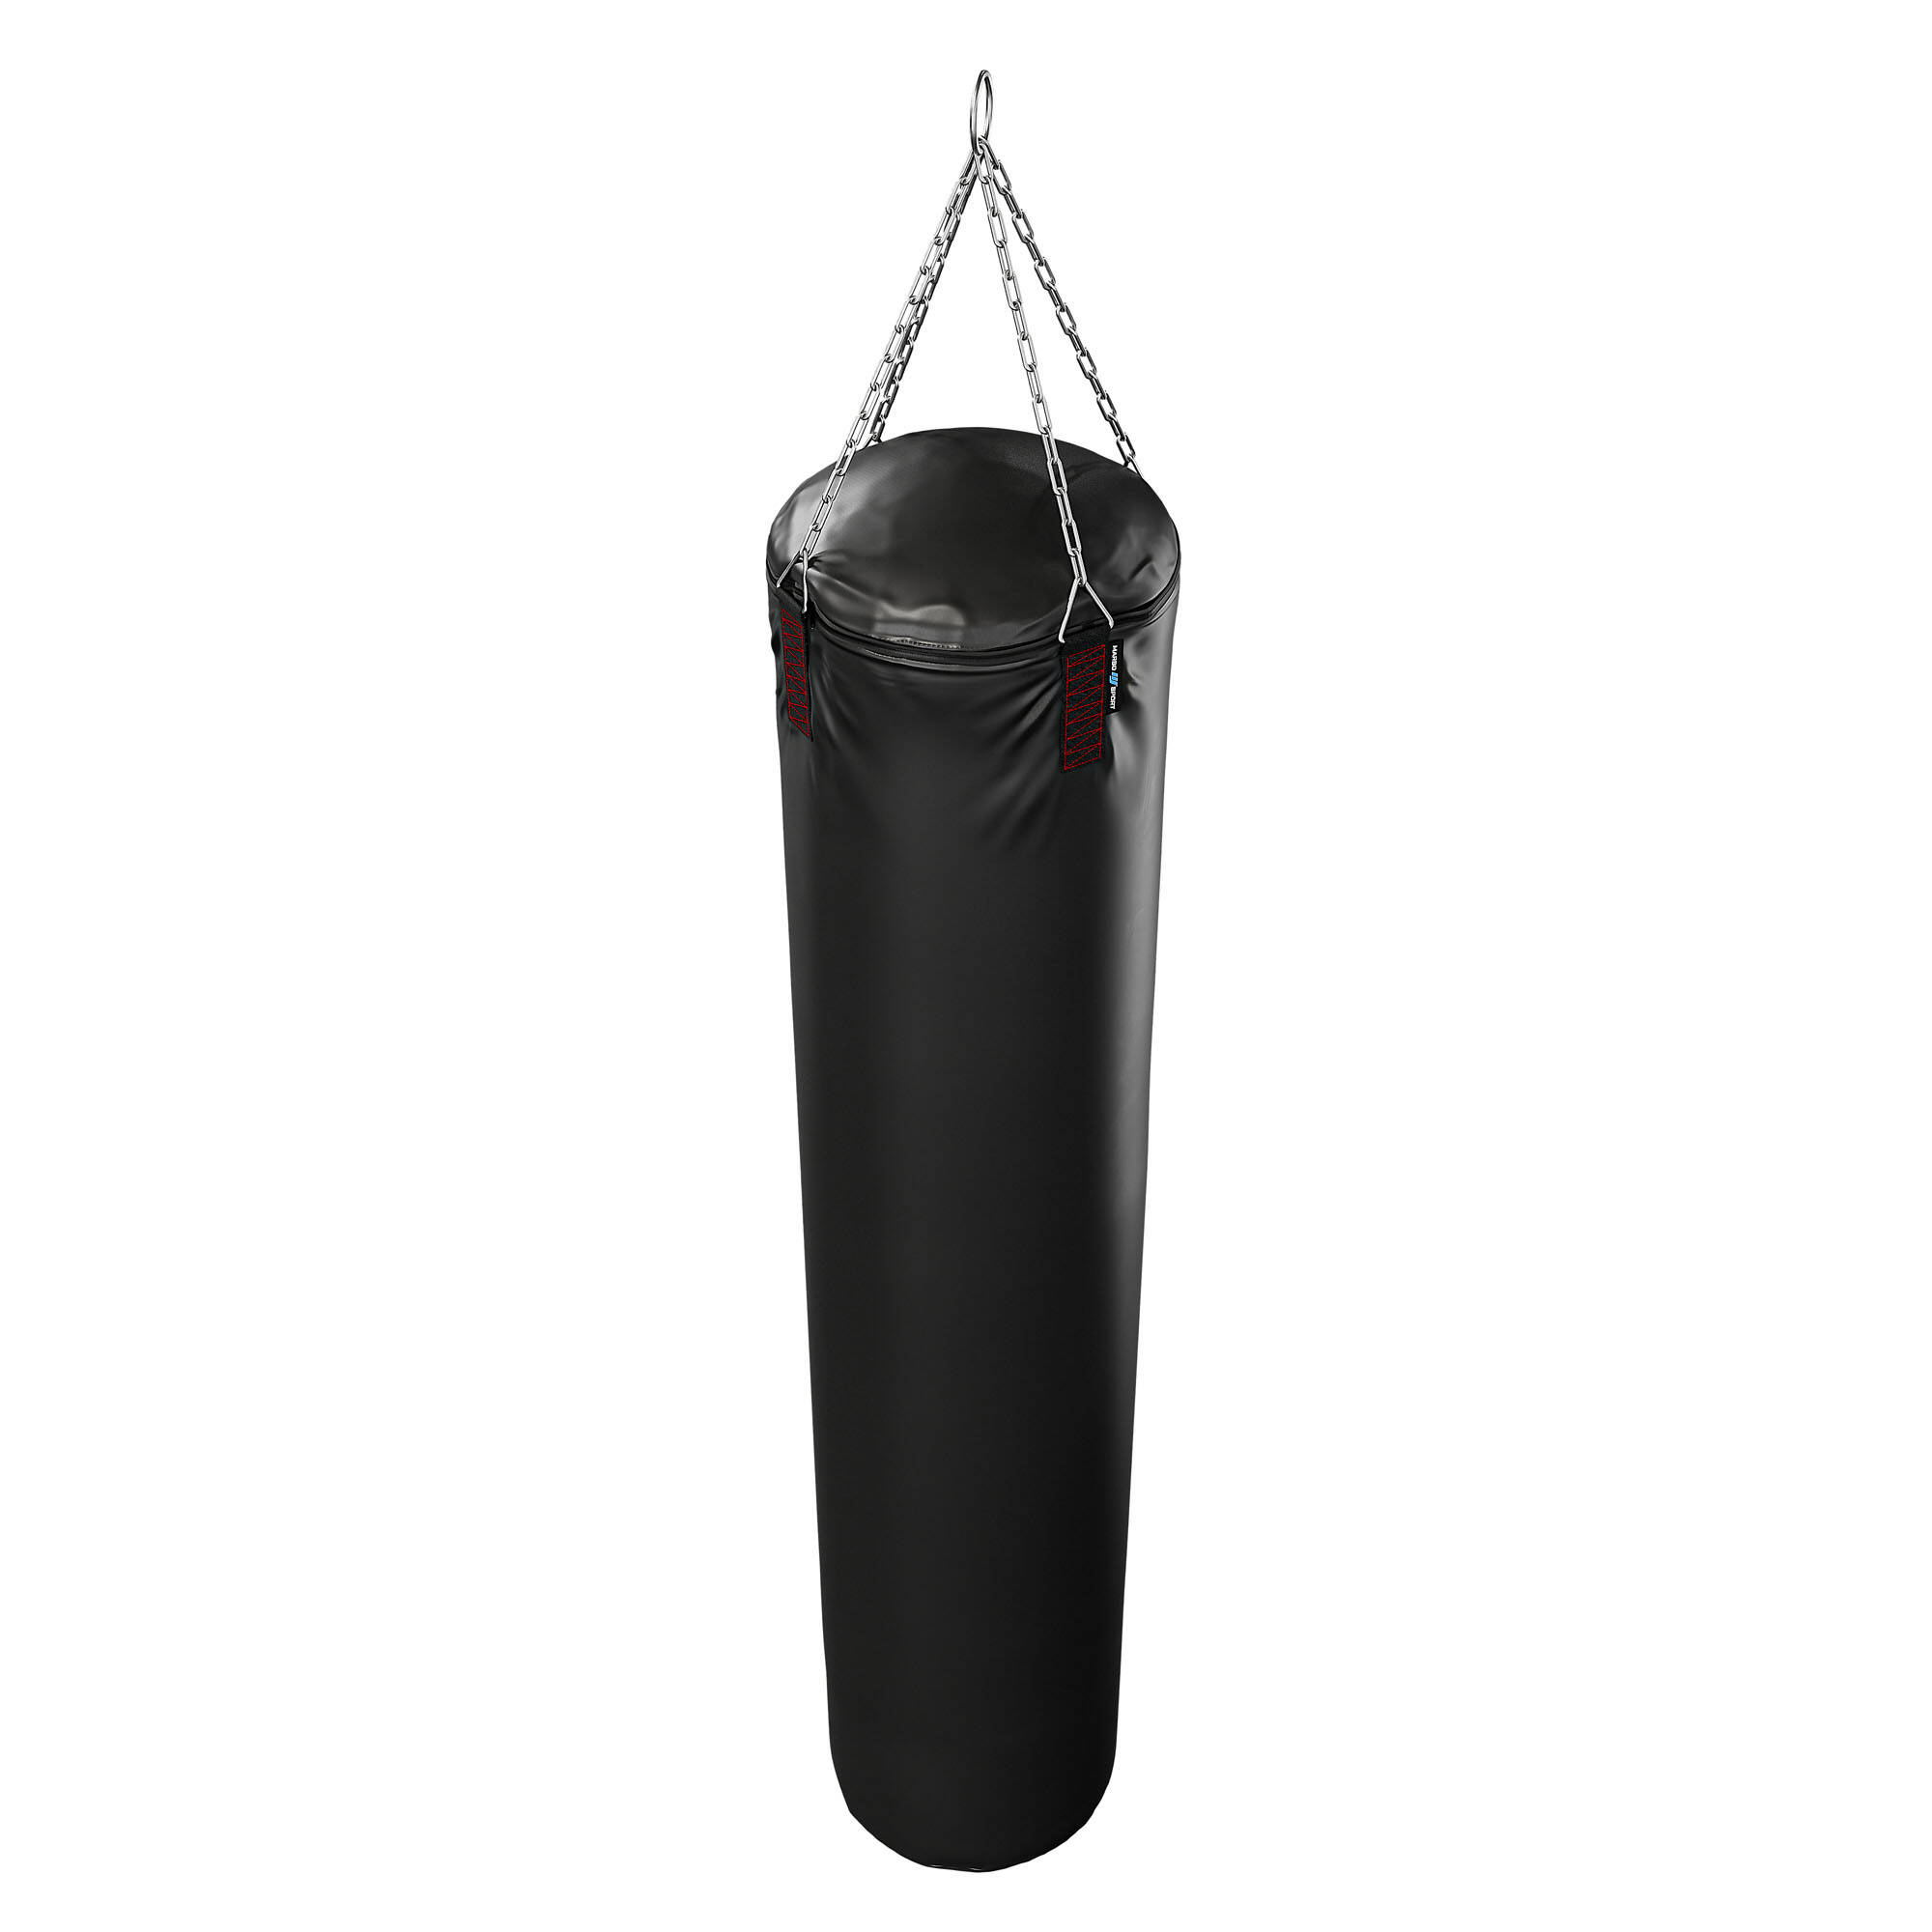 EVERYTHING YOU NEED TO KNOW ABOUT THE BENEFITS OF A PUNCHING BAG